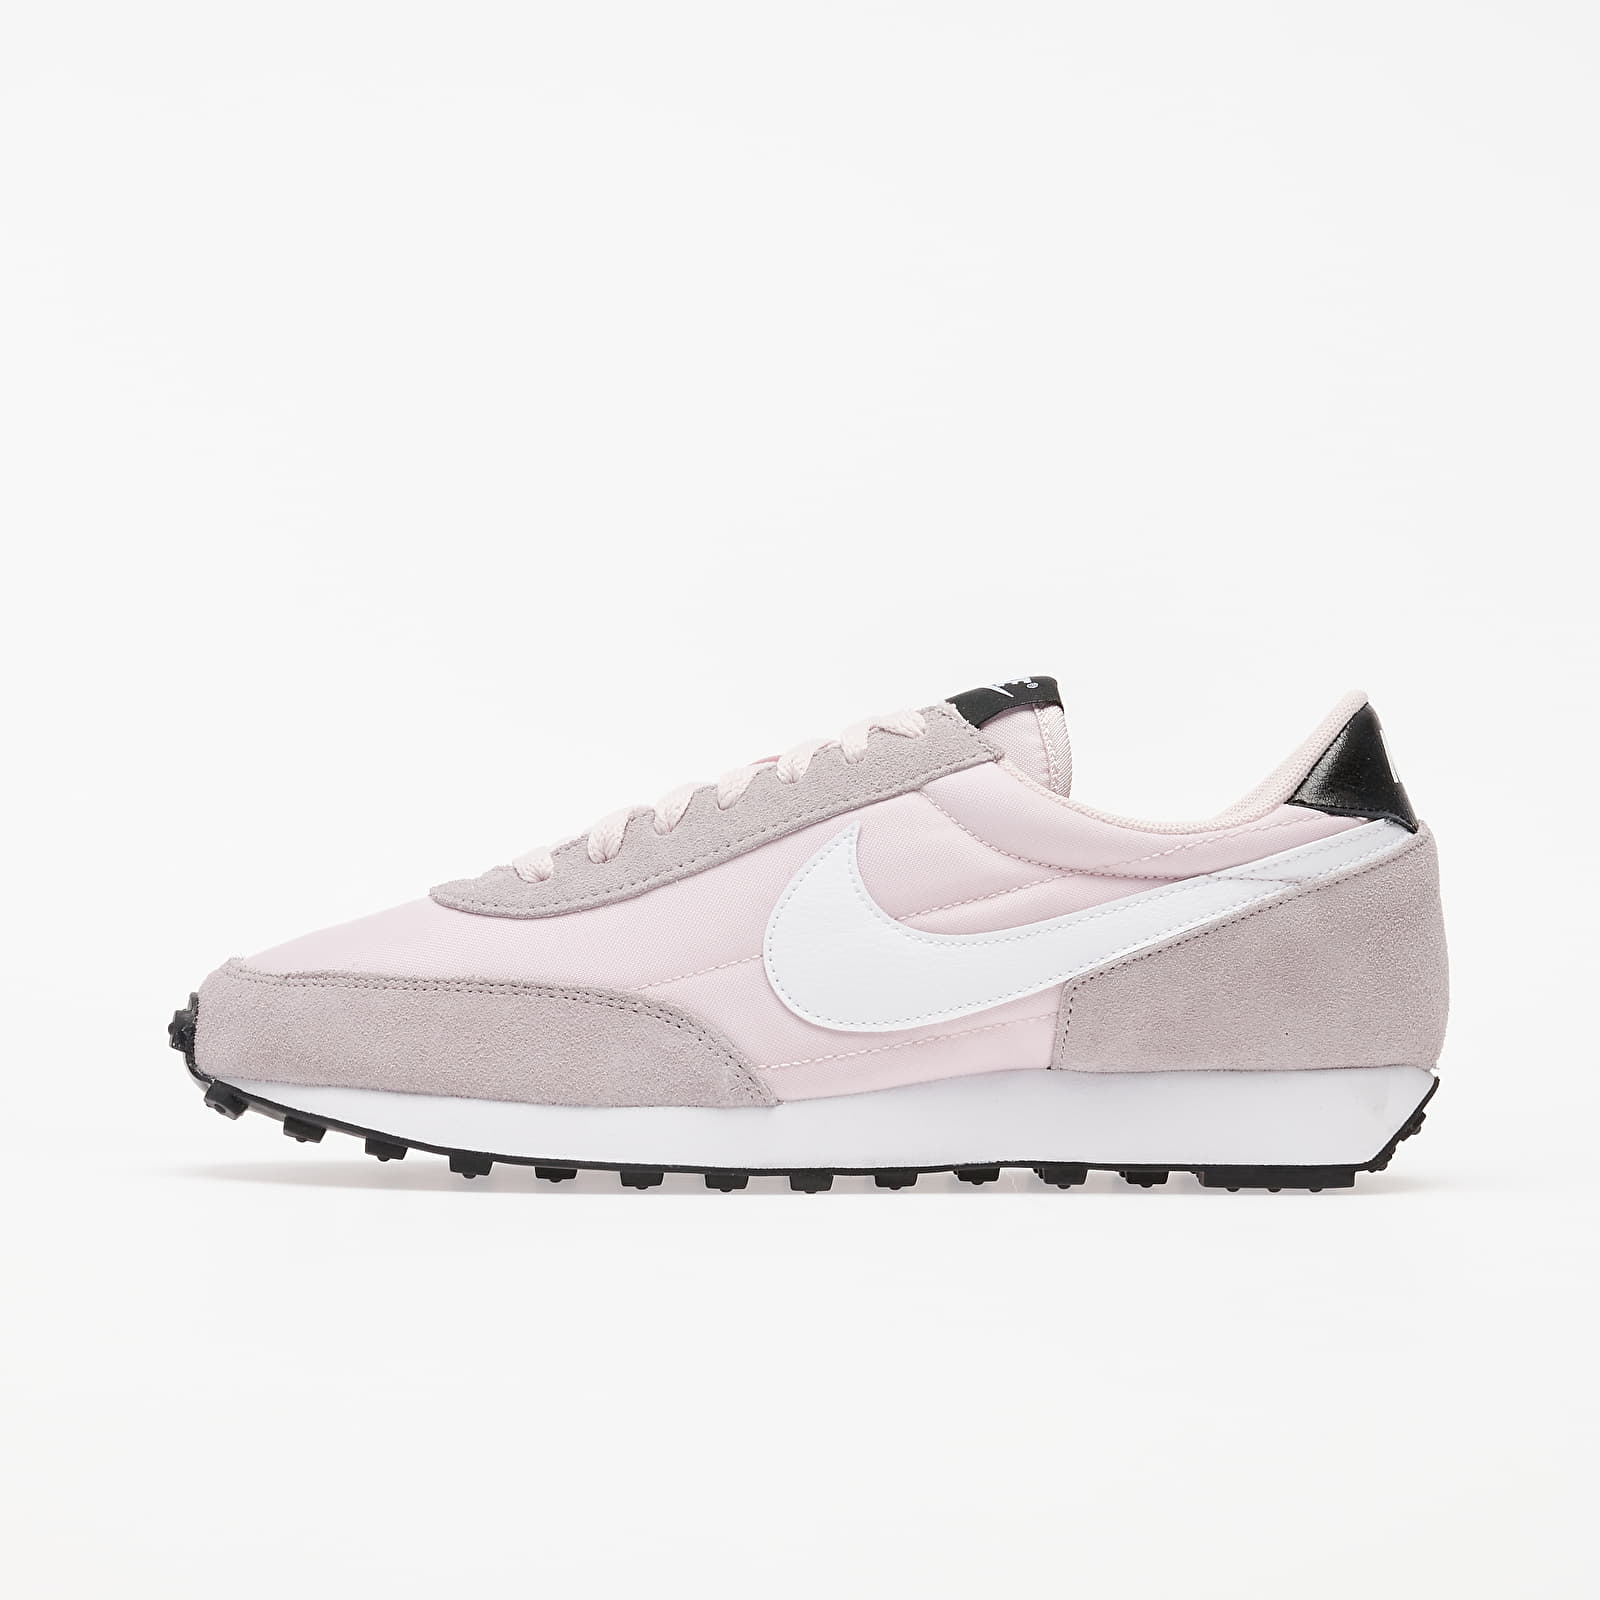 Chaussures et baskets femme Nike W Dbreak Barely Rose/ White-Silver Lilac-Black